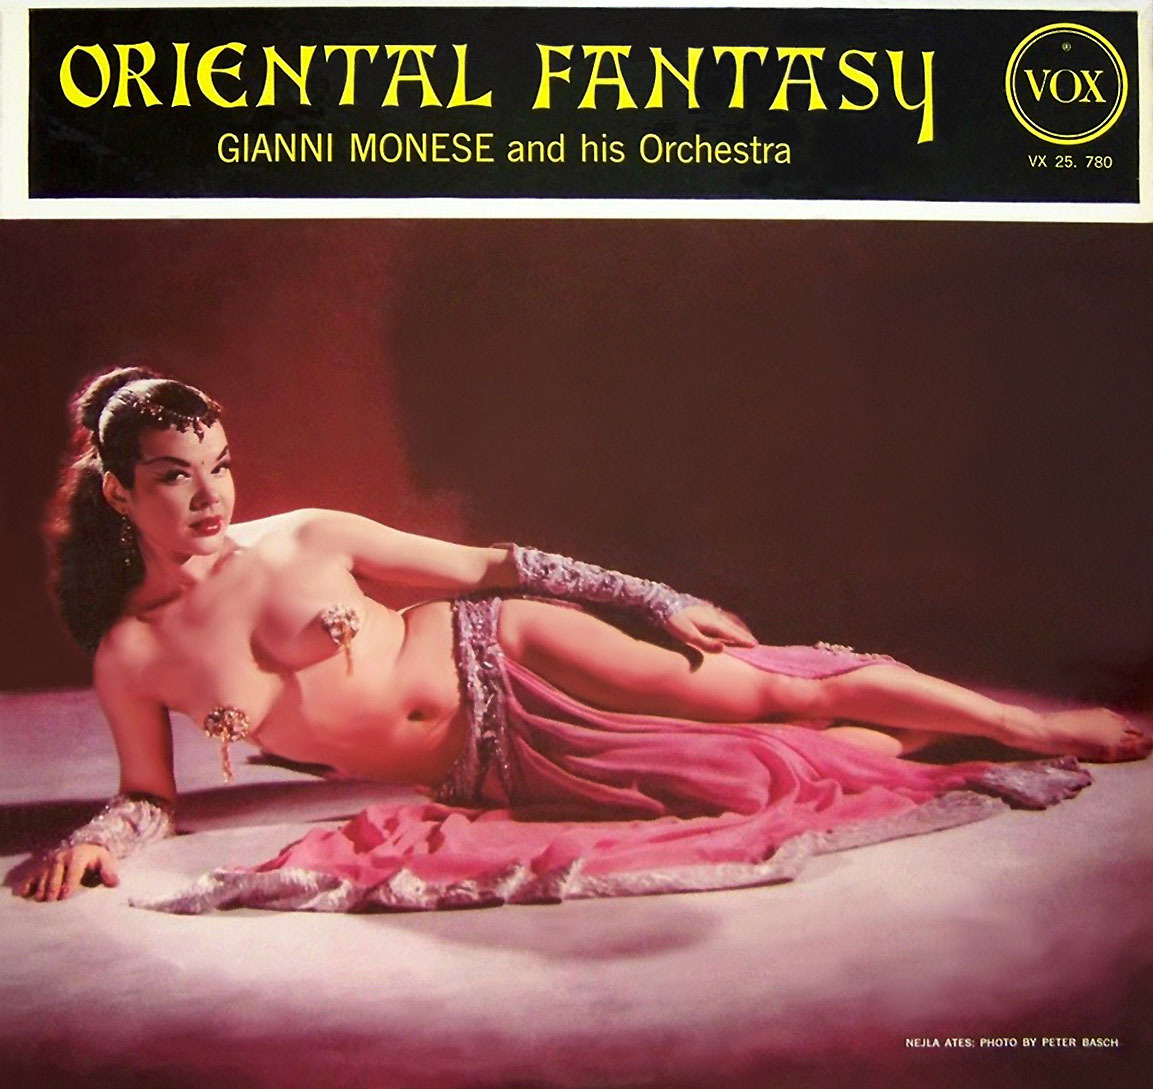 Nejla Ates appears on the cover of ‘ORIENTAL FANTASY’; a 50’s-era album cover..Photographed